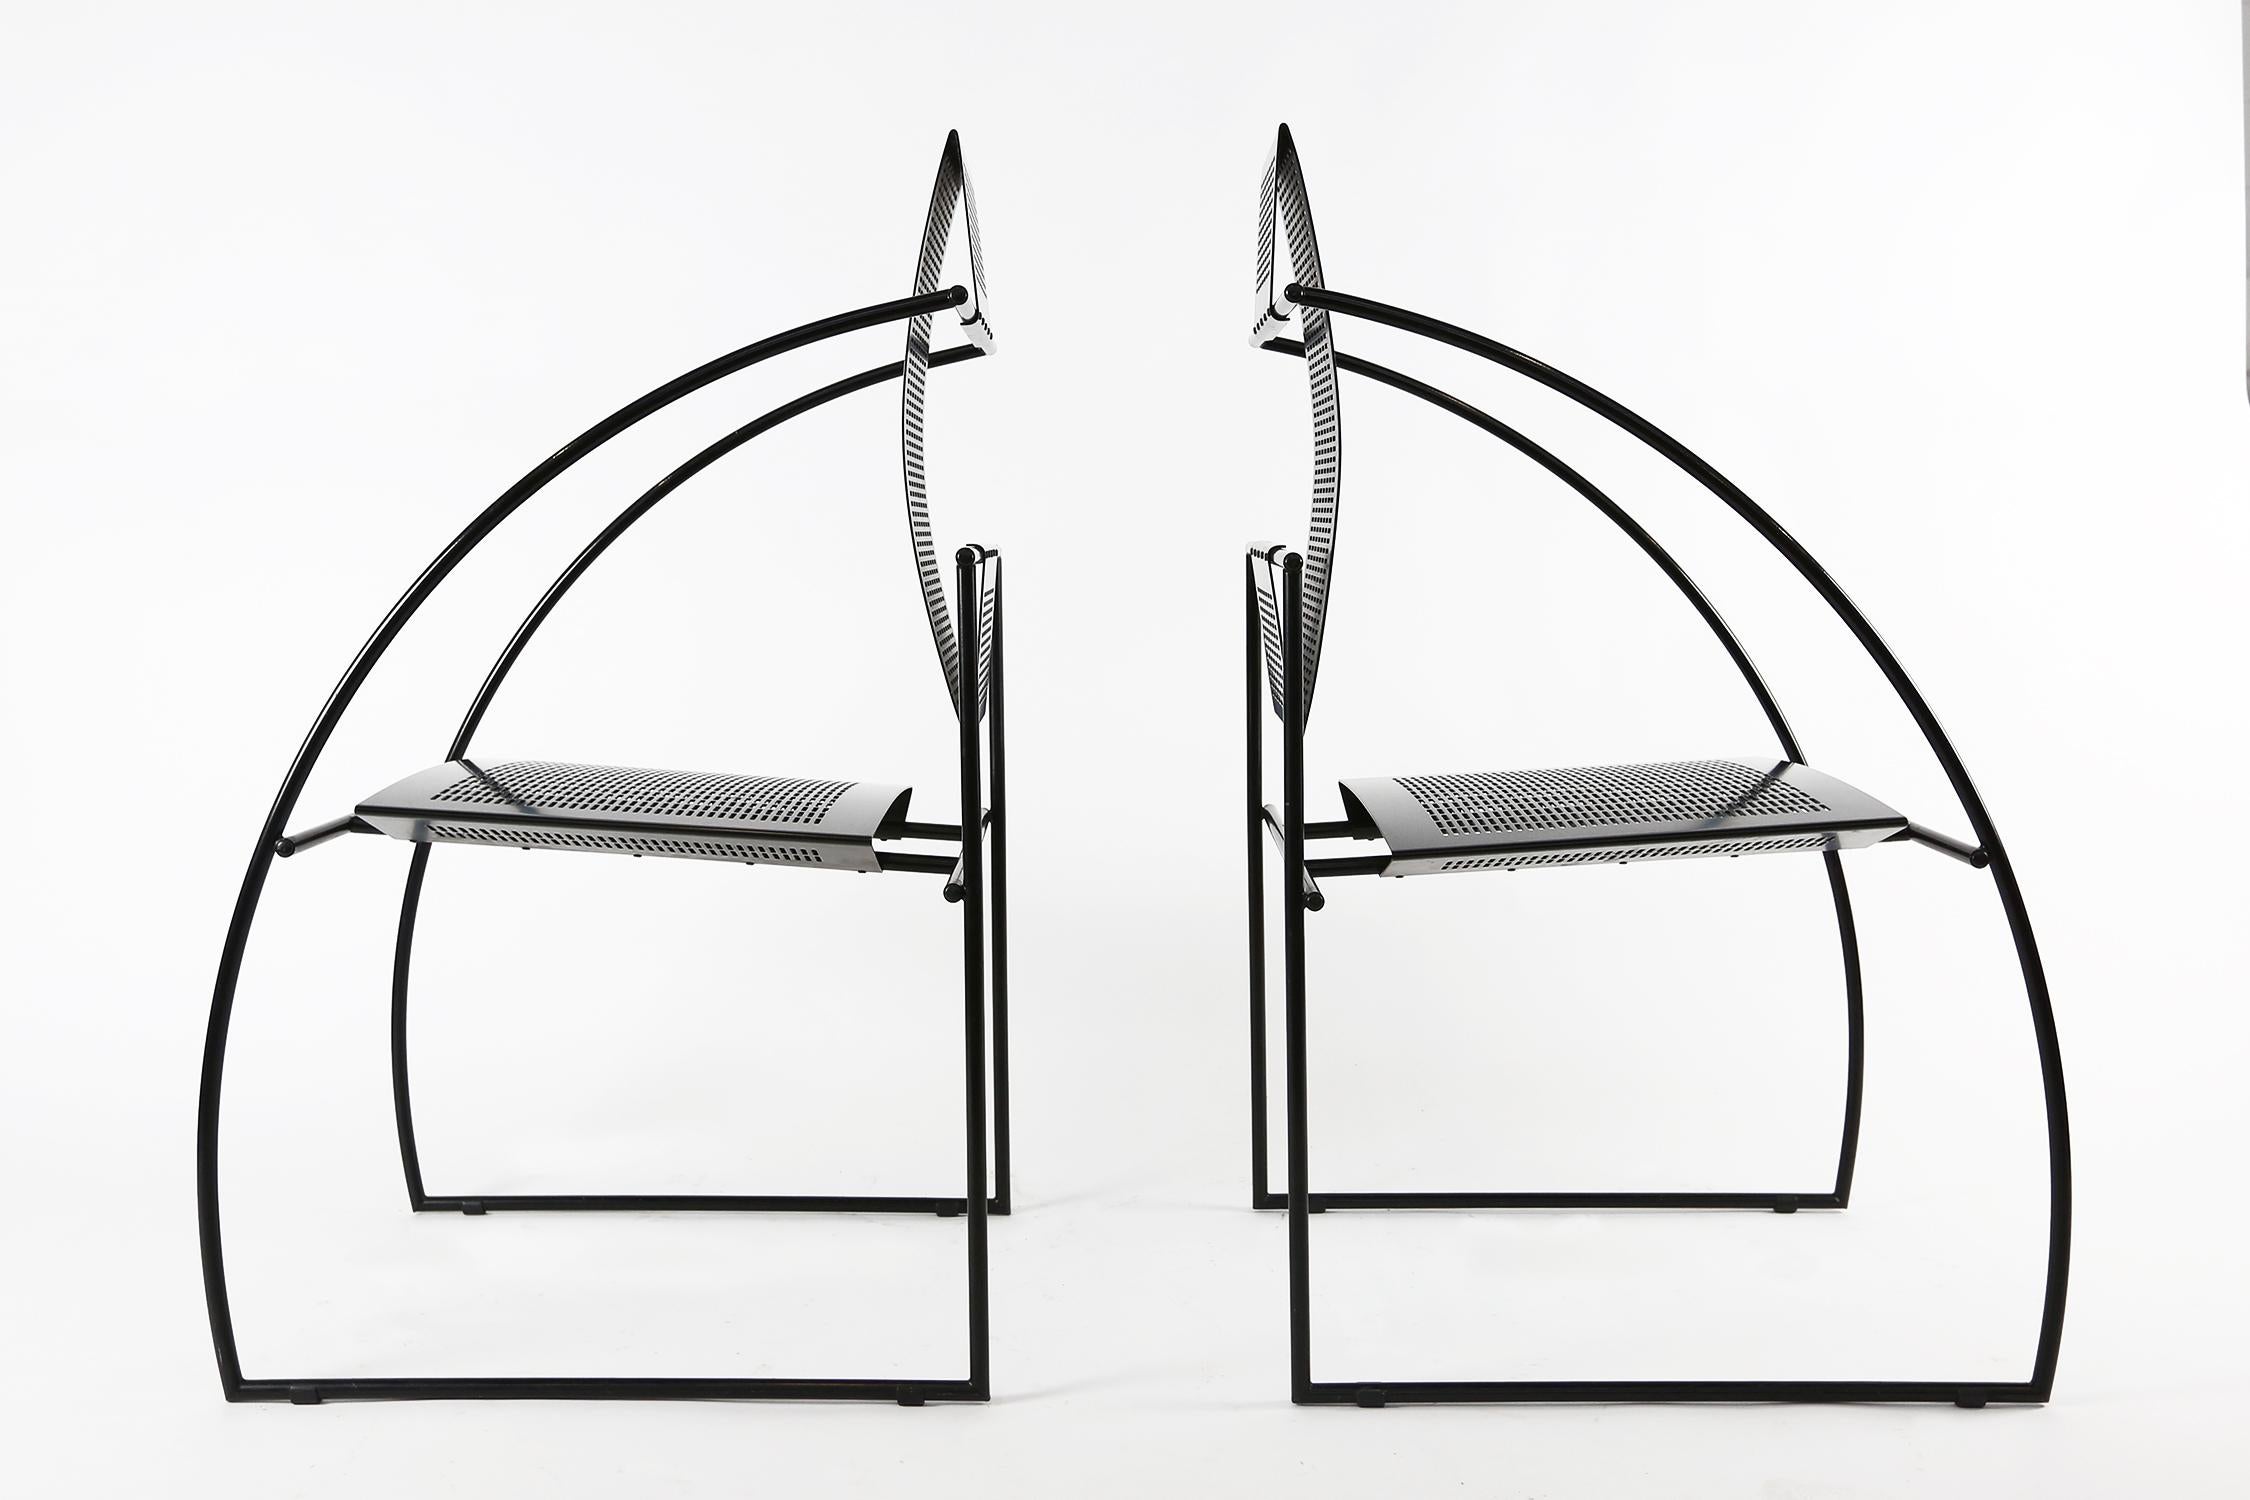 Set of 2 Quinta chairs by the Italian architect Mario Botta for Alias.
The Quinta chair is constructed with steel rod frame and folded perforated sheet metal seat and back, designed in 1985.

A pair available but priced per single chair!
  